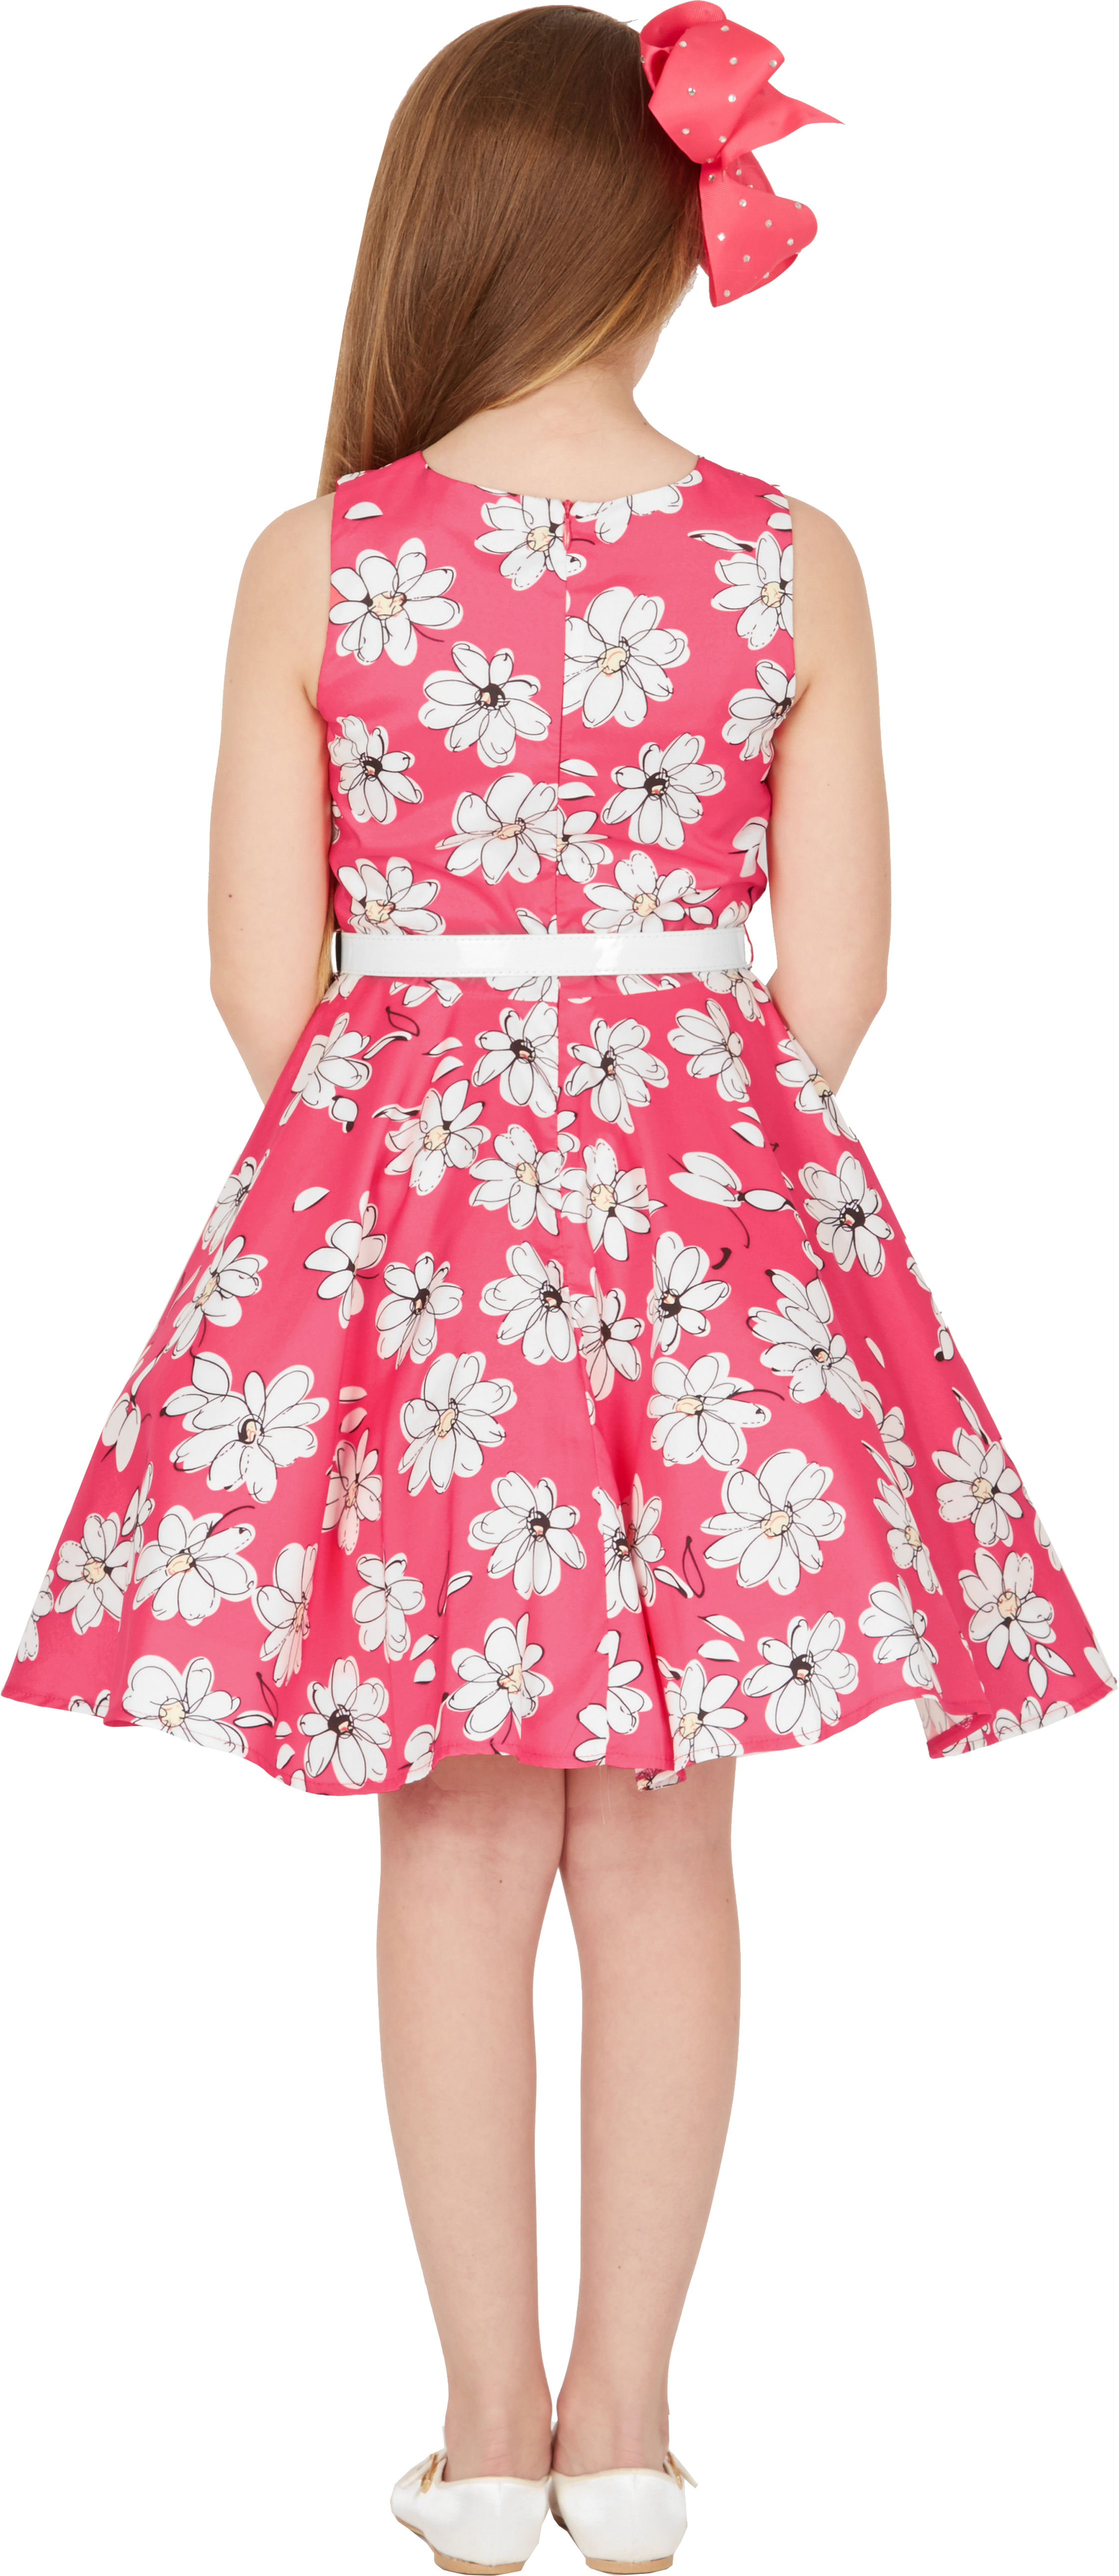 Kids 'Audrey' Vintage Clarity 50's Party Girls Prom Dress 